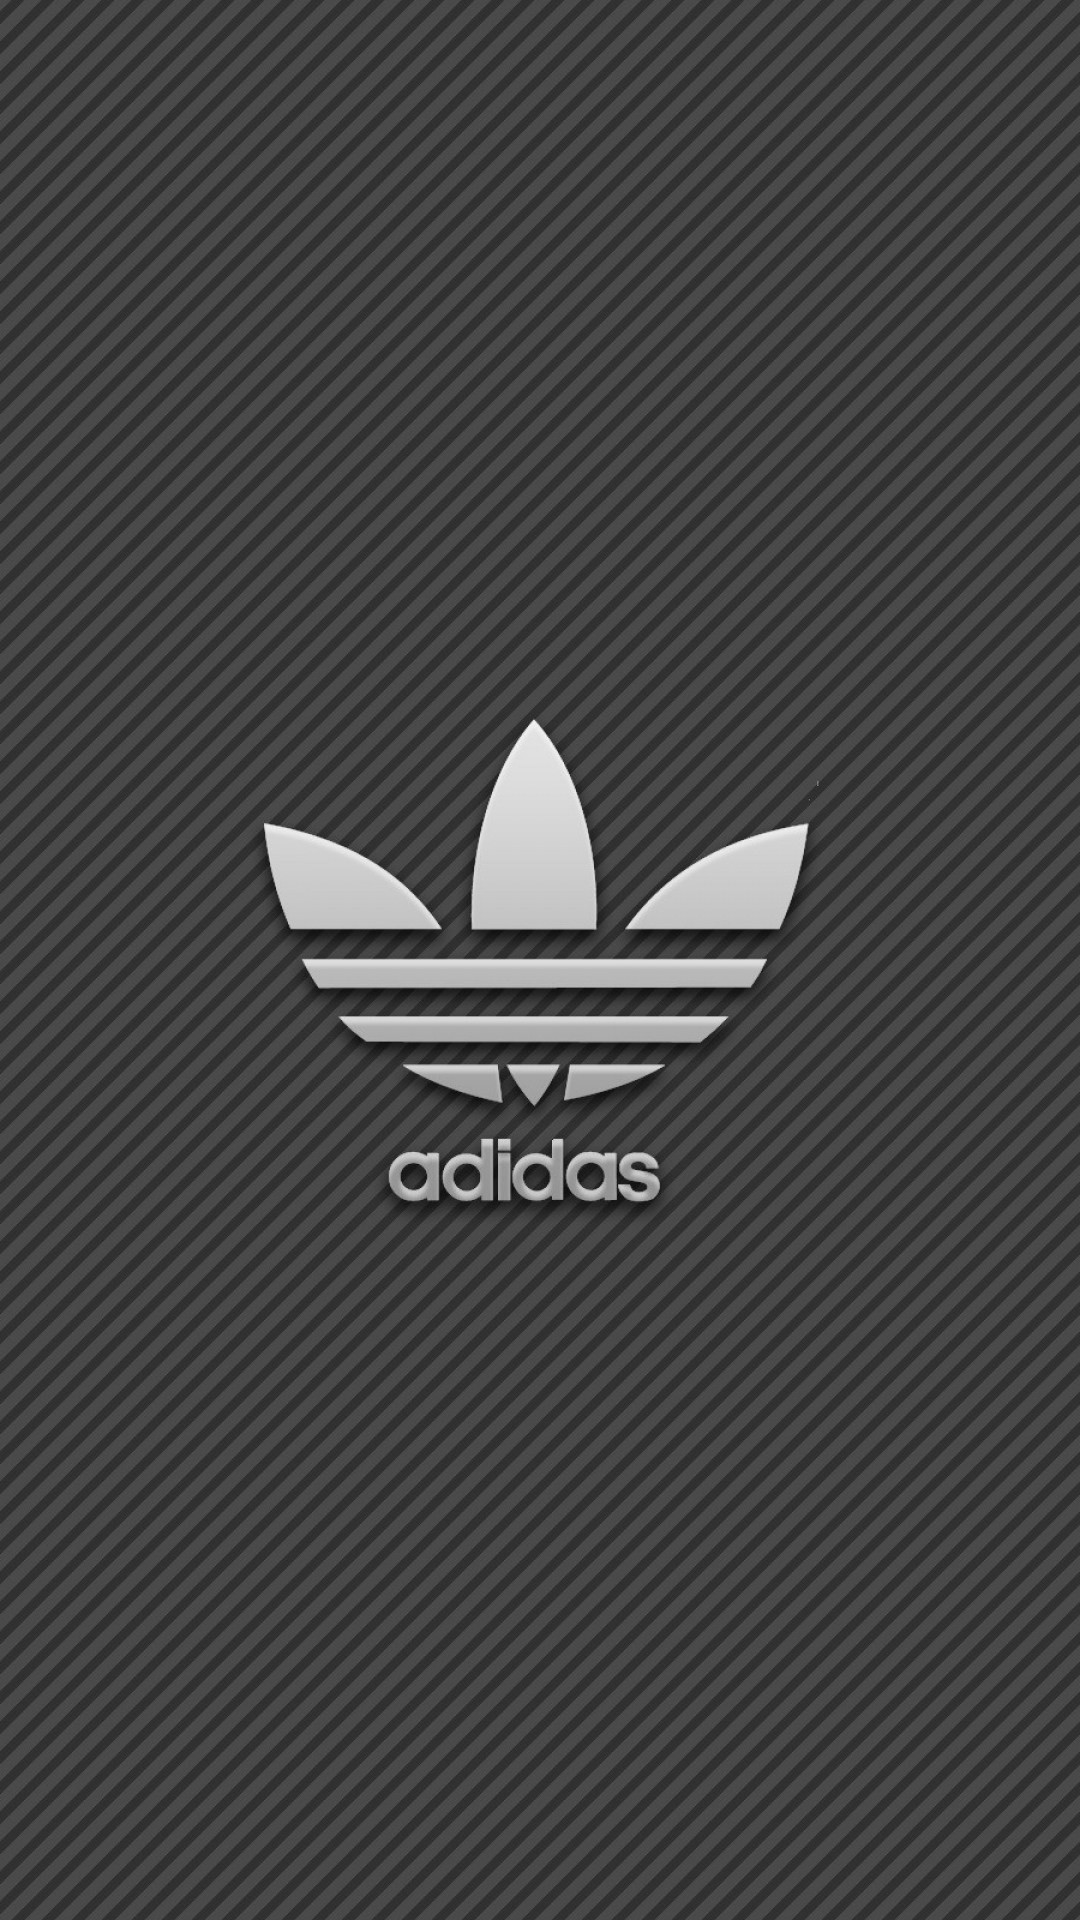 1080x1920 ... Pinofy.net Adidas IPhone Wallpapers 7 ...